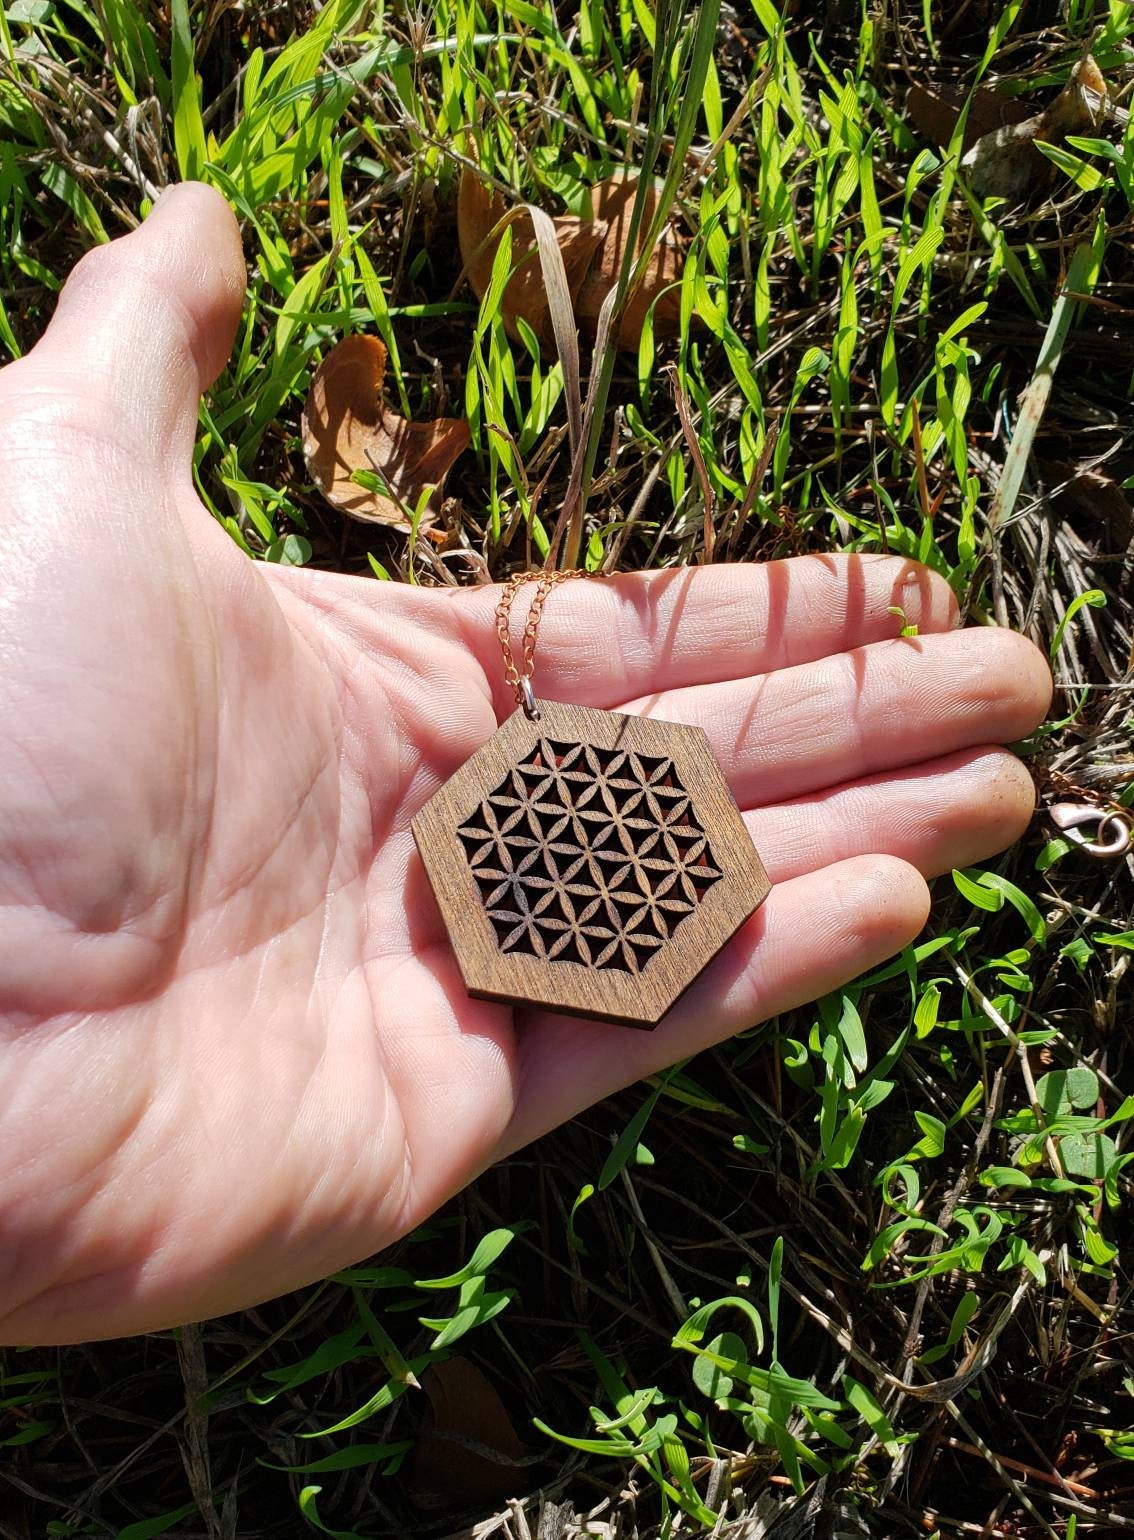 Flower of Life Laser Cut Reclaimed Wood Pendant with Copper Chain - Sacred Geometry